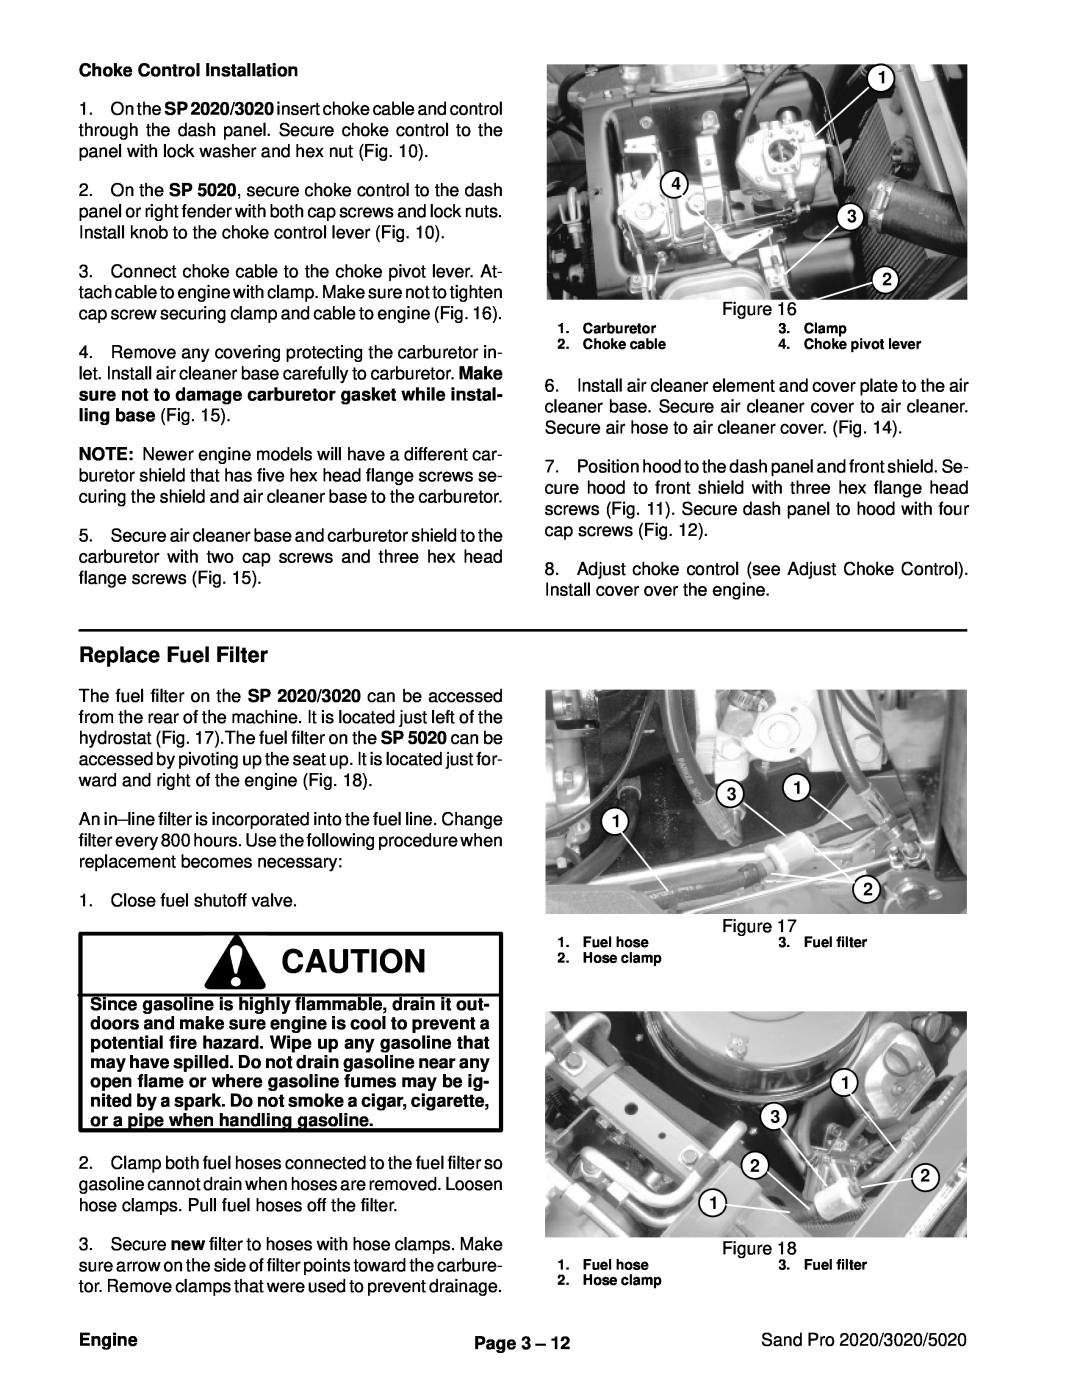 Toro 3020, 5020, 2020 service manual Replace Fuel Filter, Choke Control Installation, Engine, Page 3 